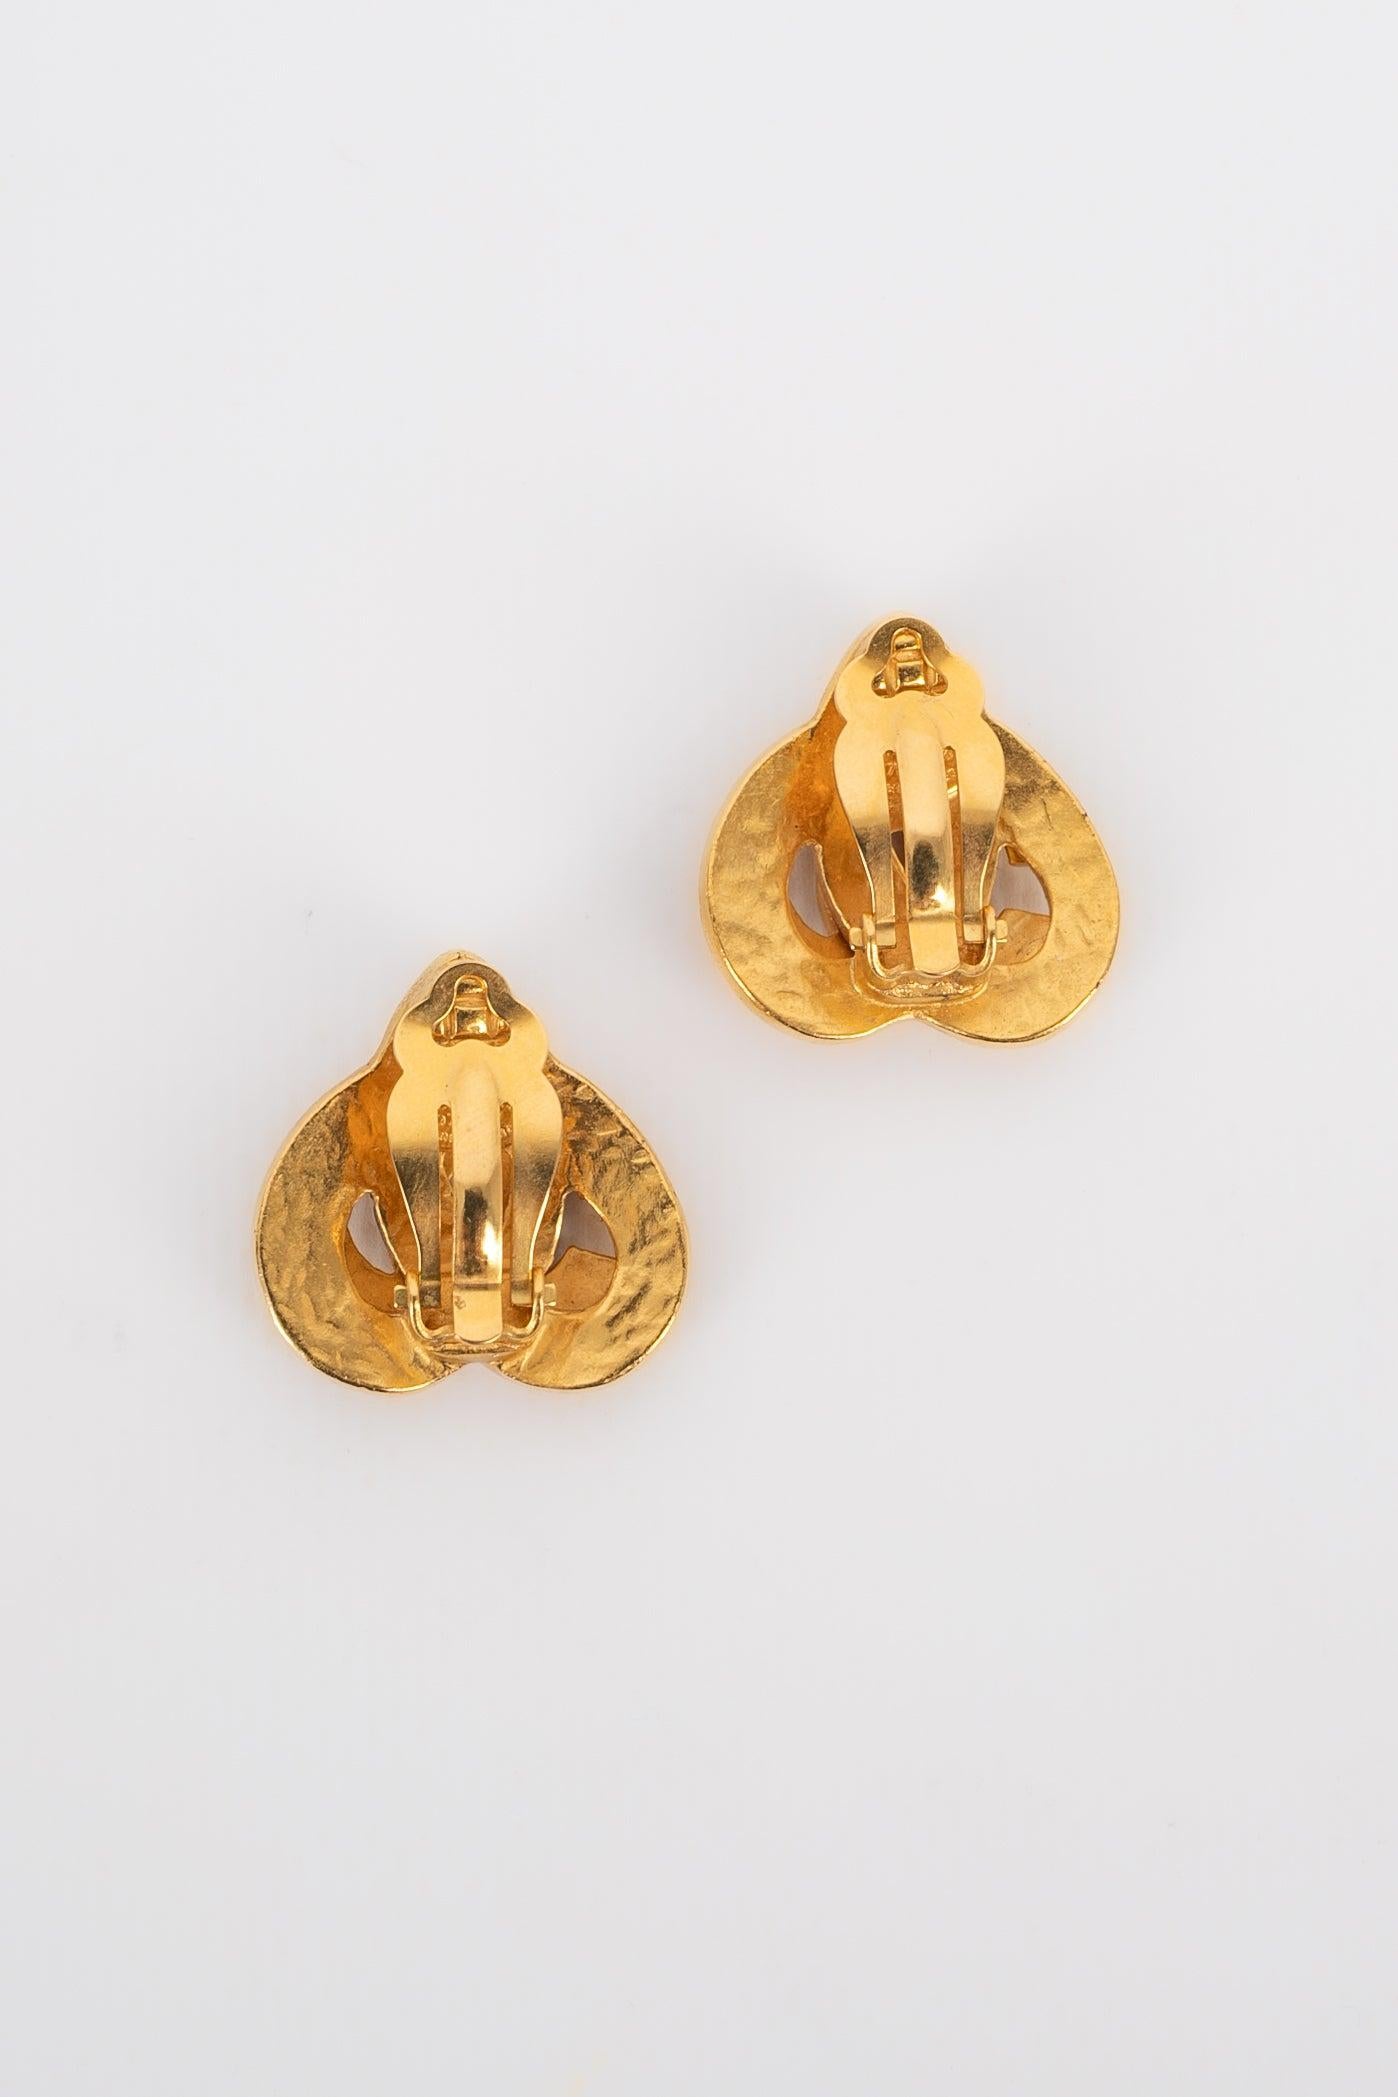 Chanel - (Made in France) Golden metal clip-on earrings representing hearts. 1997 Spring-Summer Collection.
 
 Additional information: 
 Condition: Very good condition
 Dimensions: 2.8 cm x 2.5 cm
 Period: 20th Century
 
 Seller Reference: BOB51